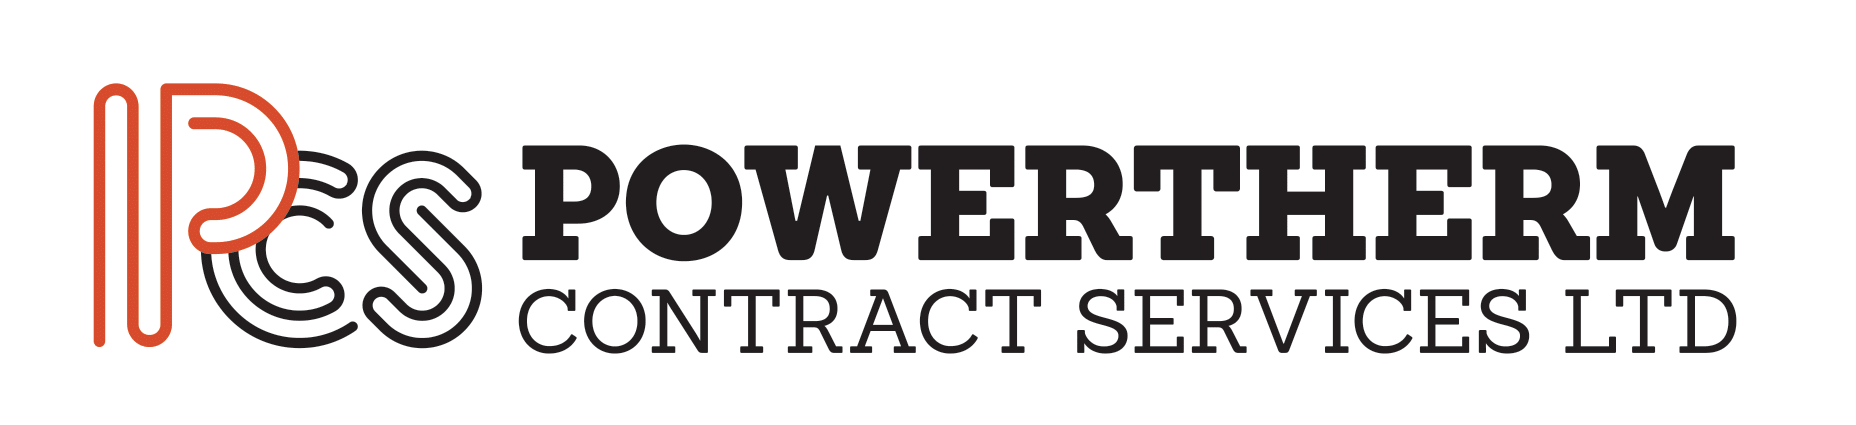 Powertherm Contract Services